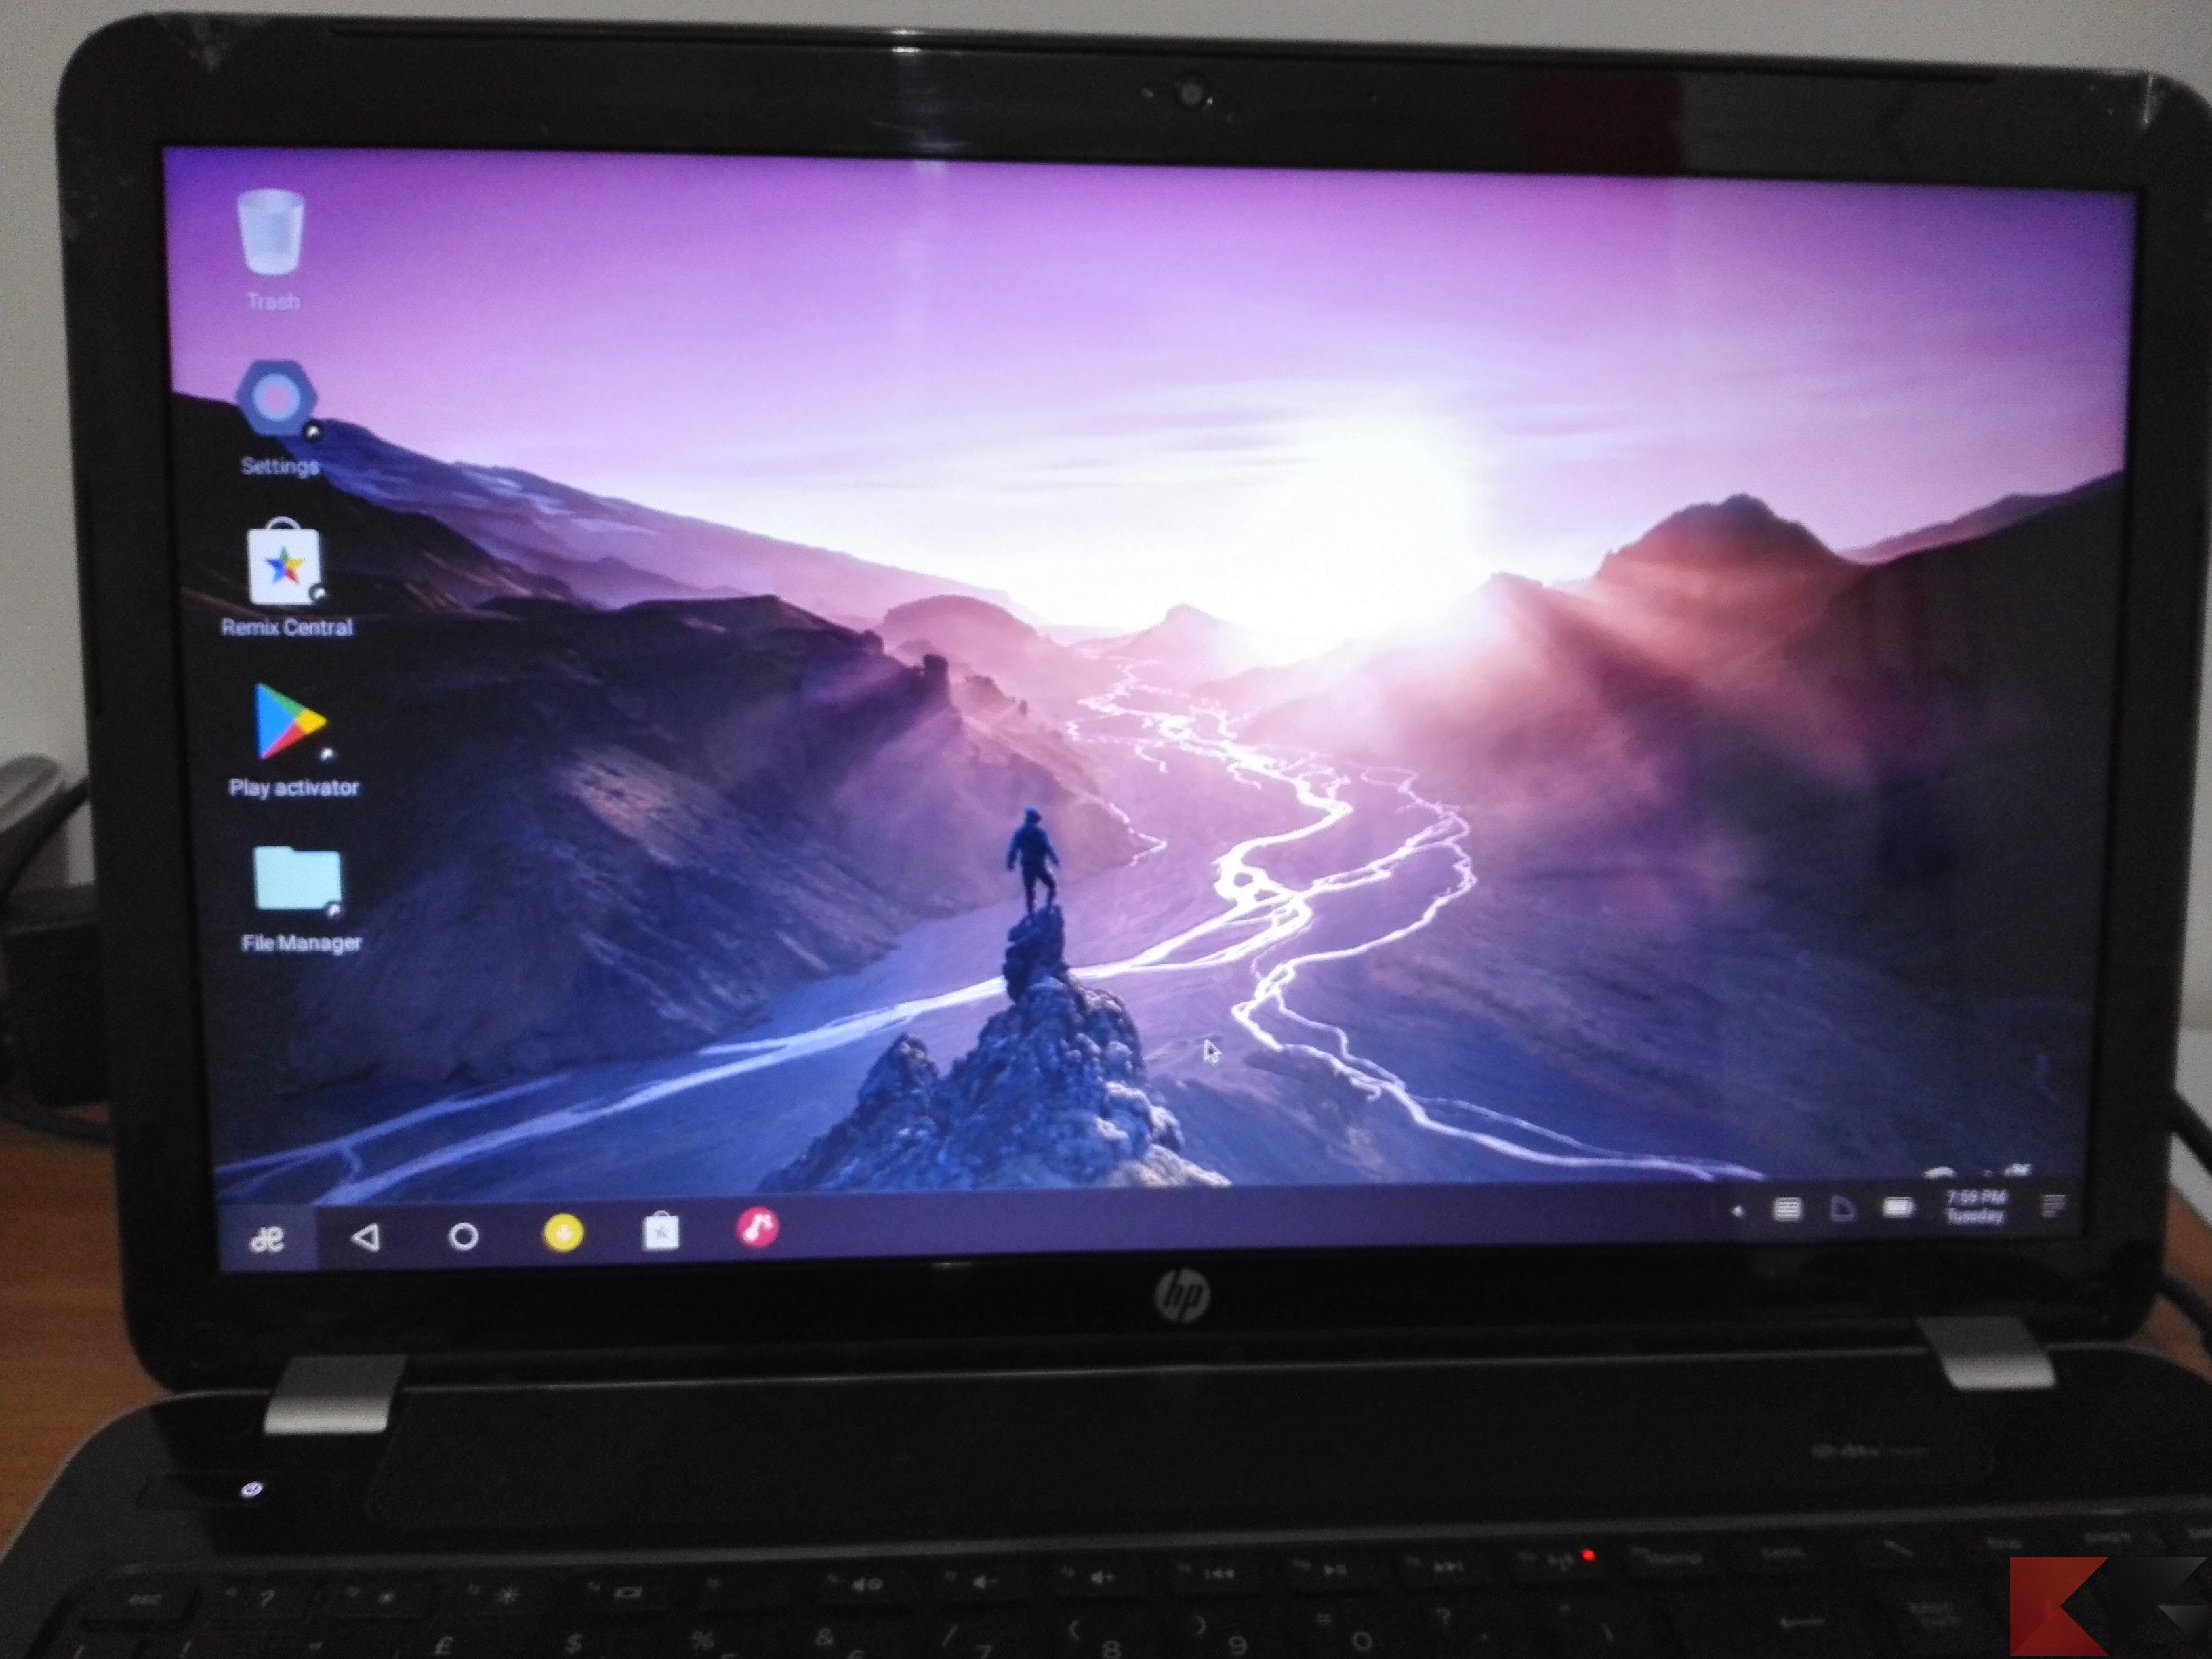 Android su PC - Remix OS